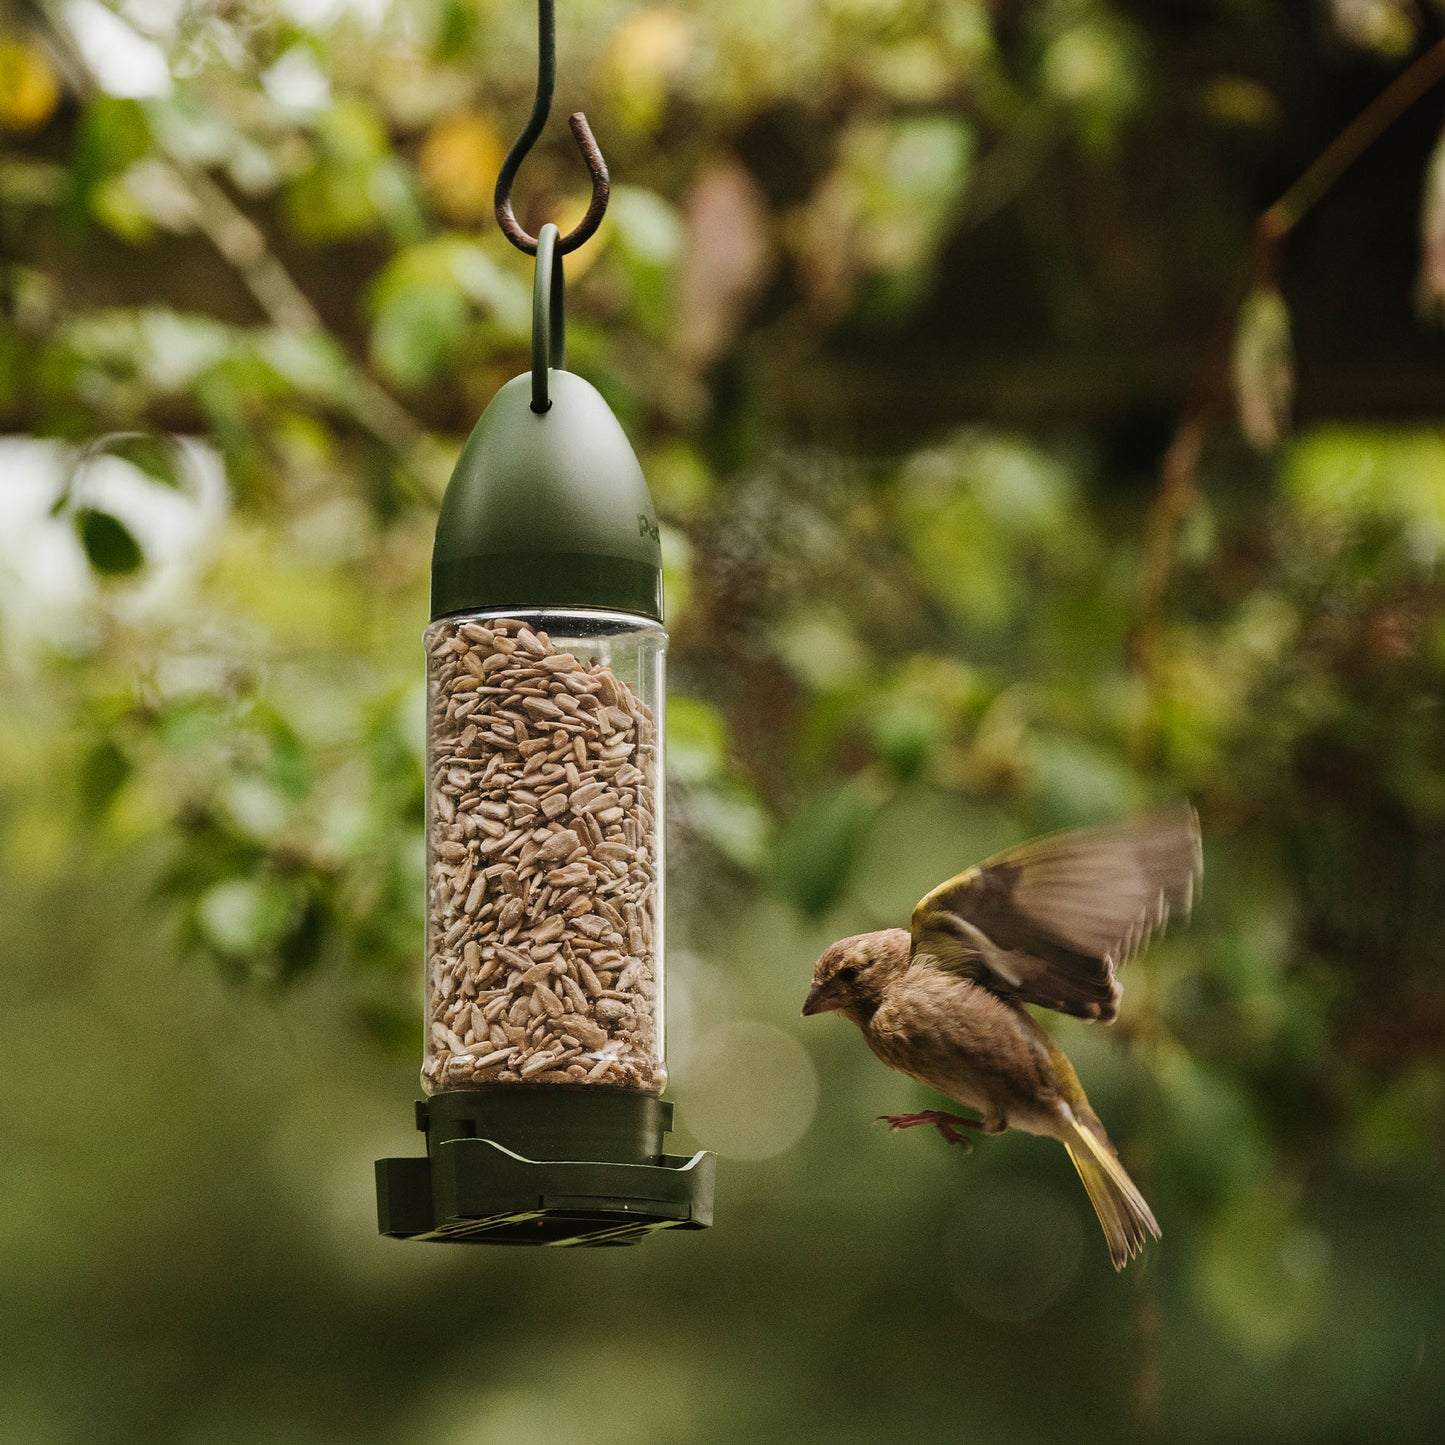 Peckish Sunflower Hearts Filled Feeder with bird flying